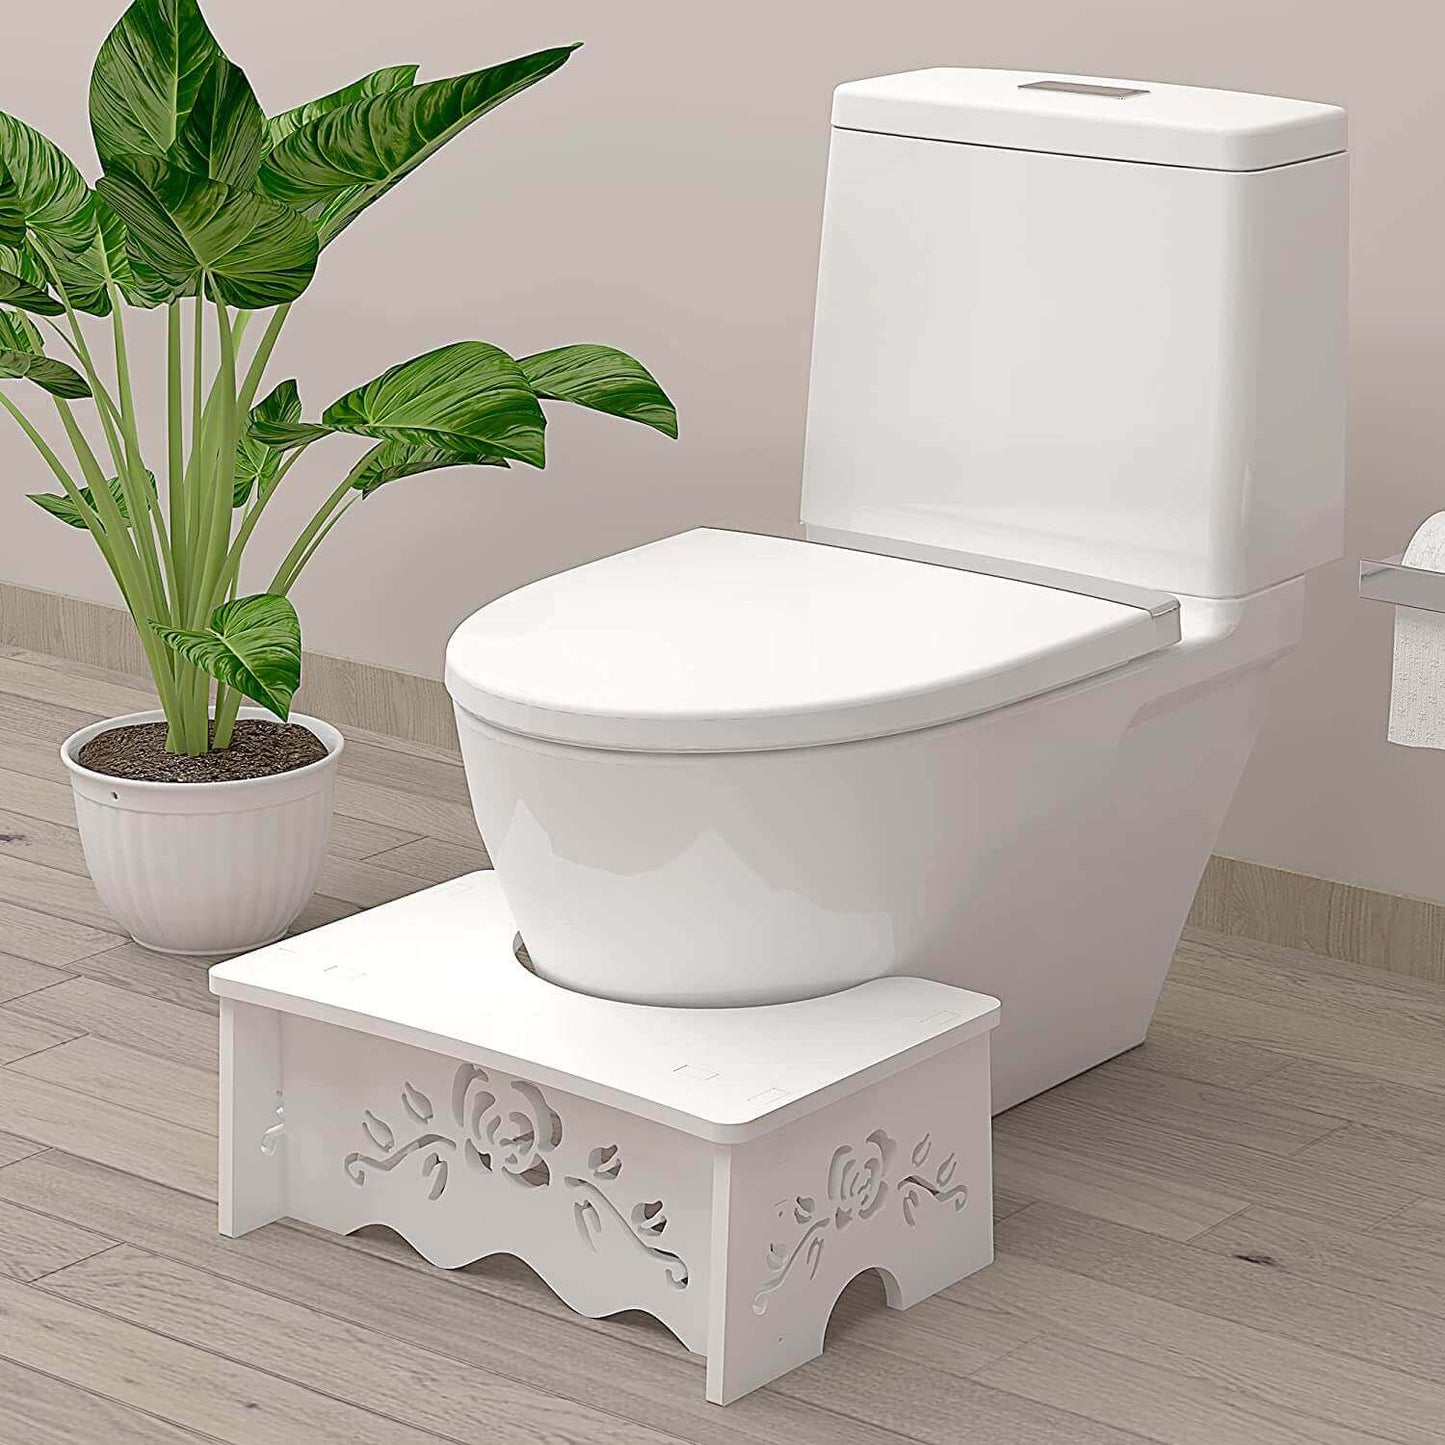 fanwer wooden toilet stool for adults, squatty toilet foot step stool, scene